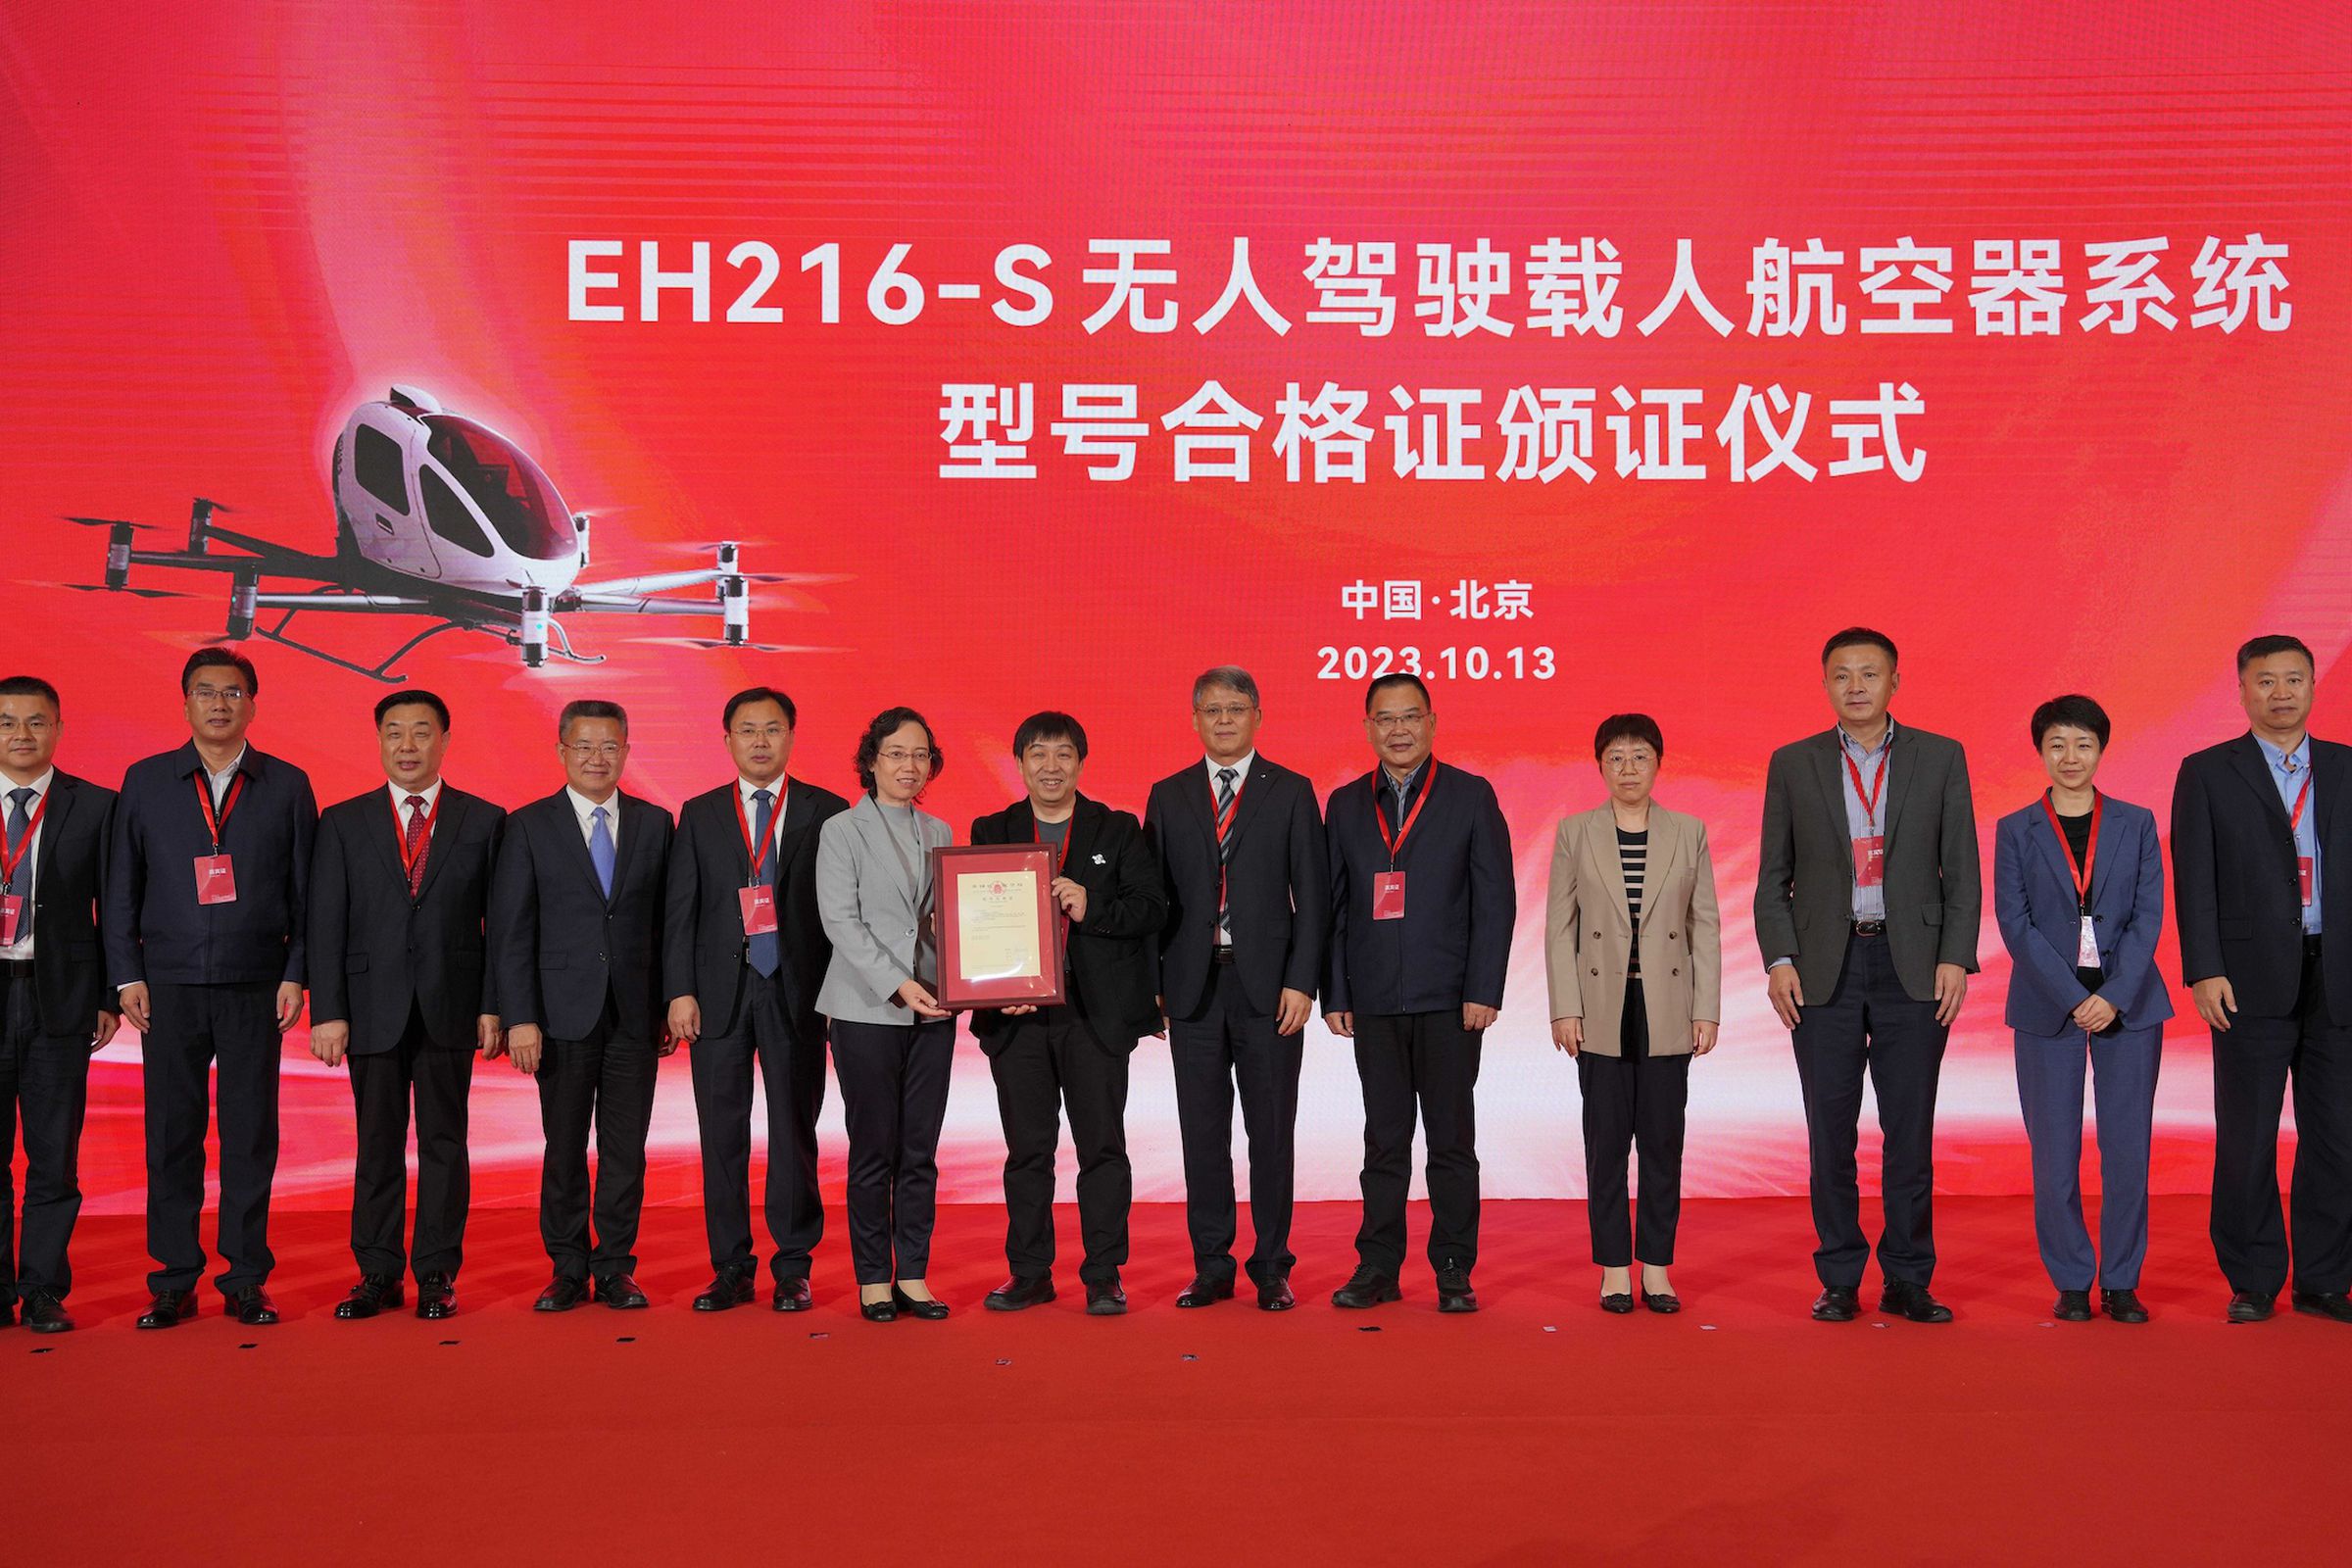 A picture of EHang Holdings executives lined up in a row in front of a red backdrop holding the new certification.